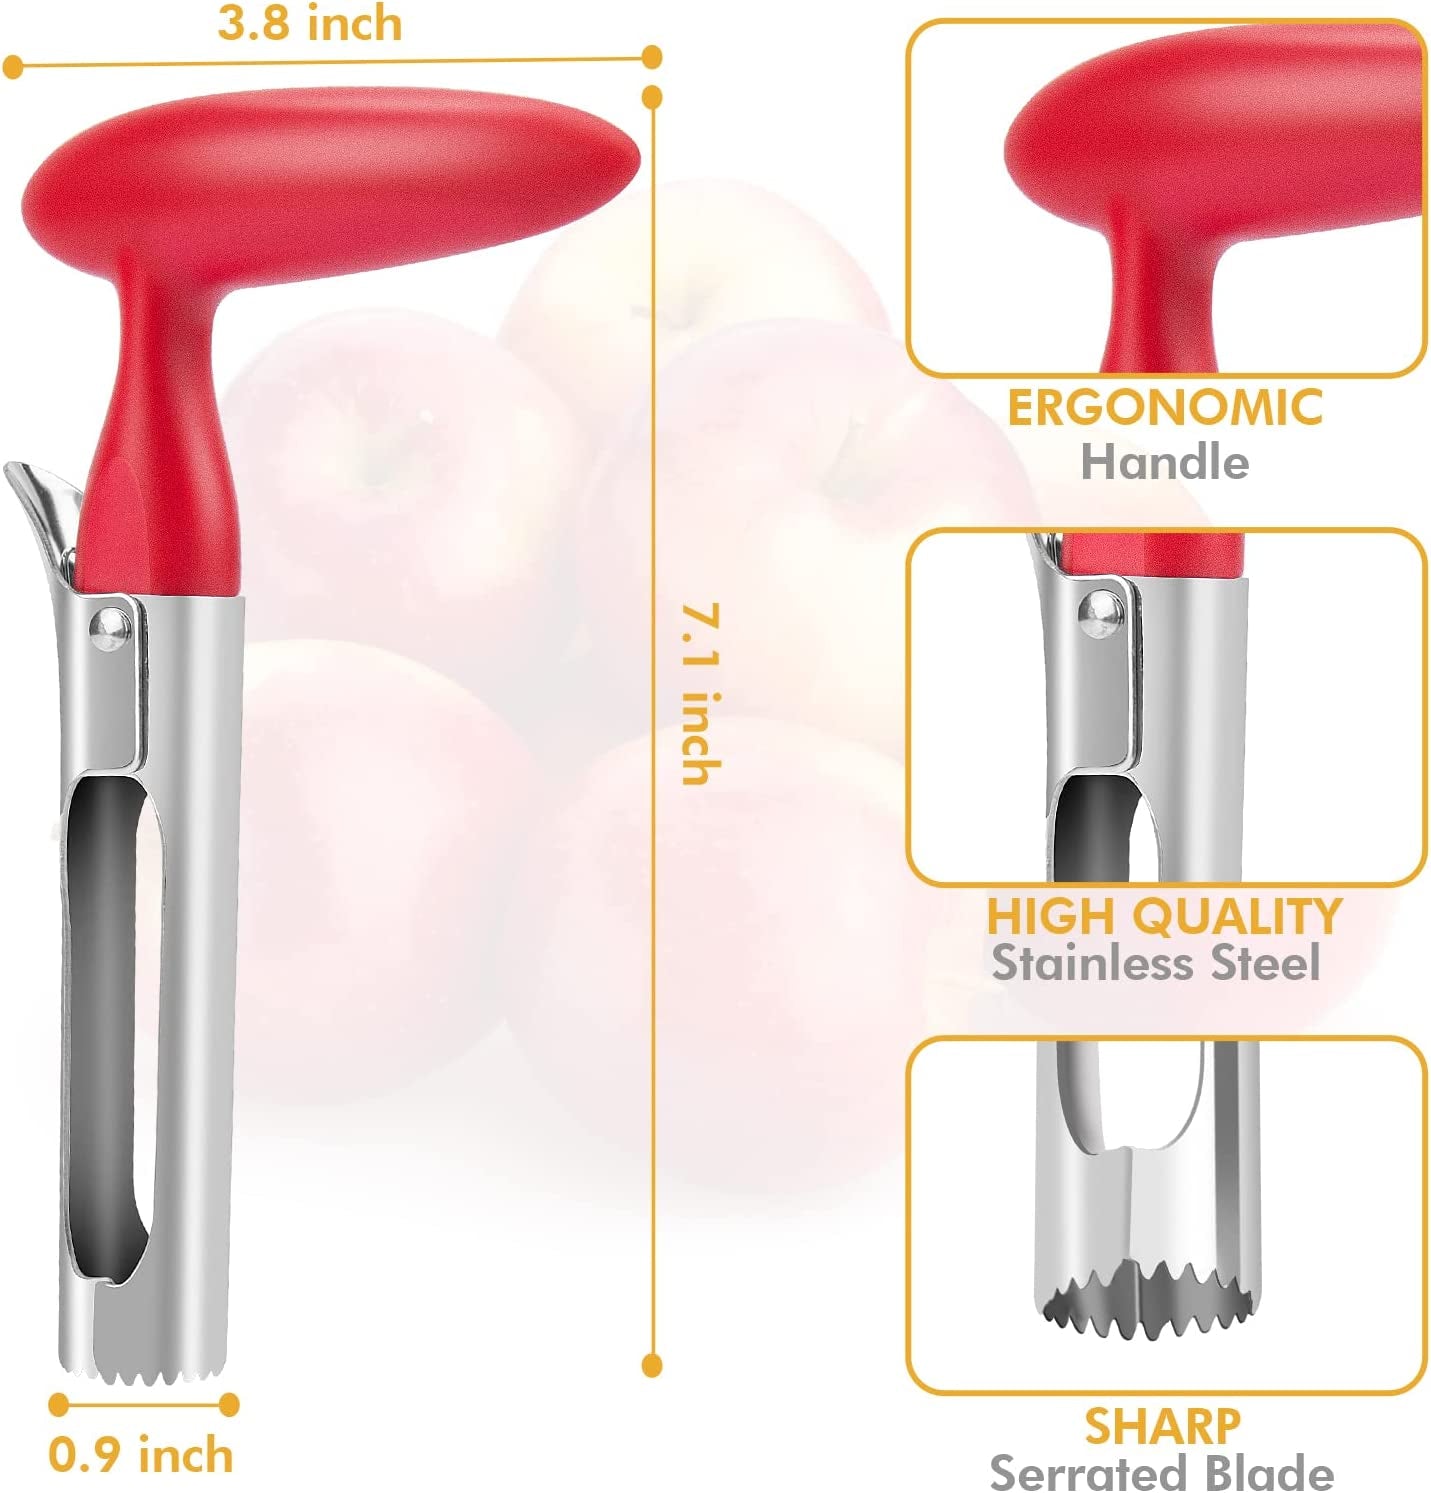 Apple Slicer Corer Cutter, Professional Apple Cutter，With Comfortable Handle Premium Apple Corer Remover, Durable Sturdy Fruit Cutter Kitchen Gadgets -LIANGKEN (Red)